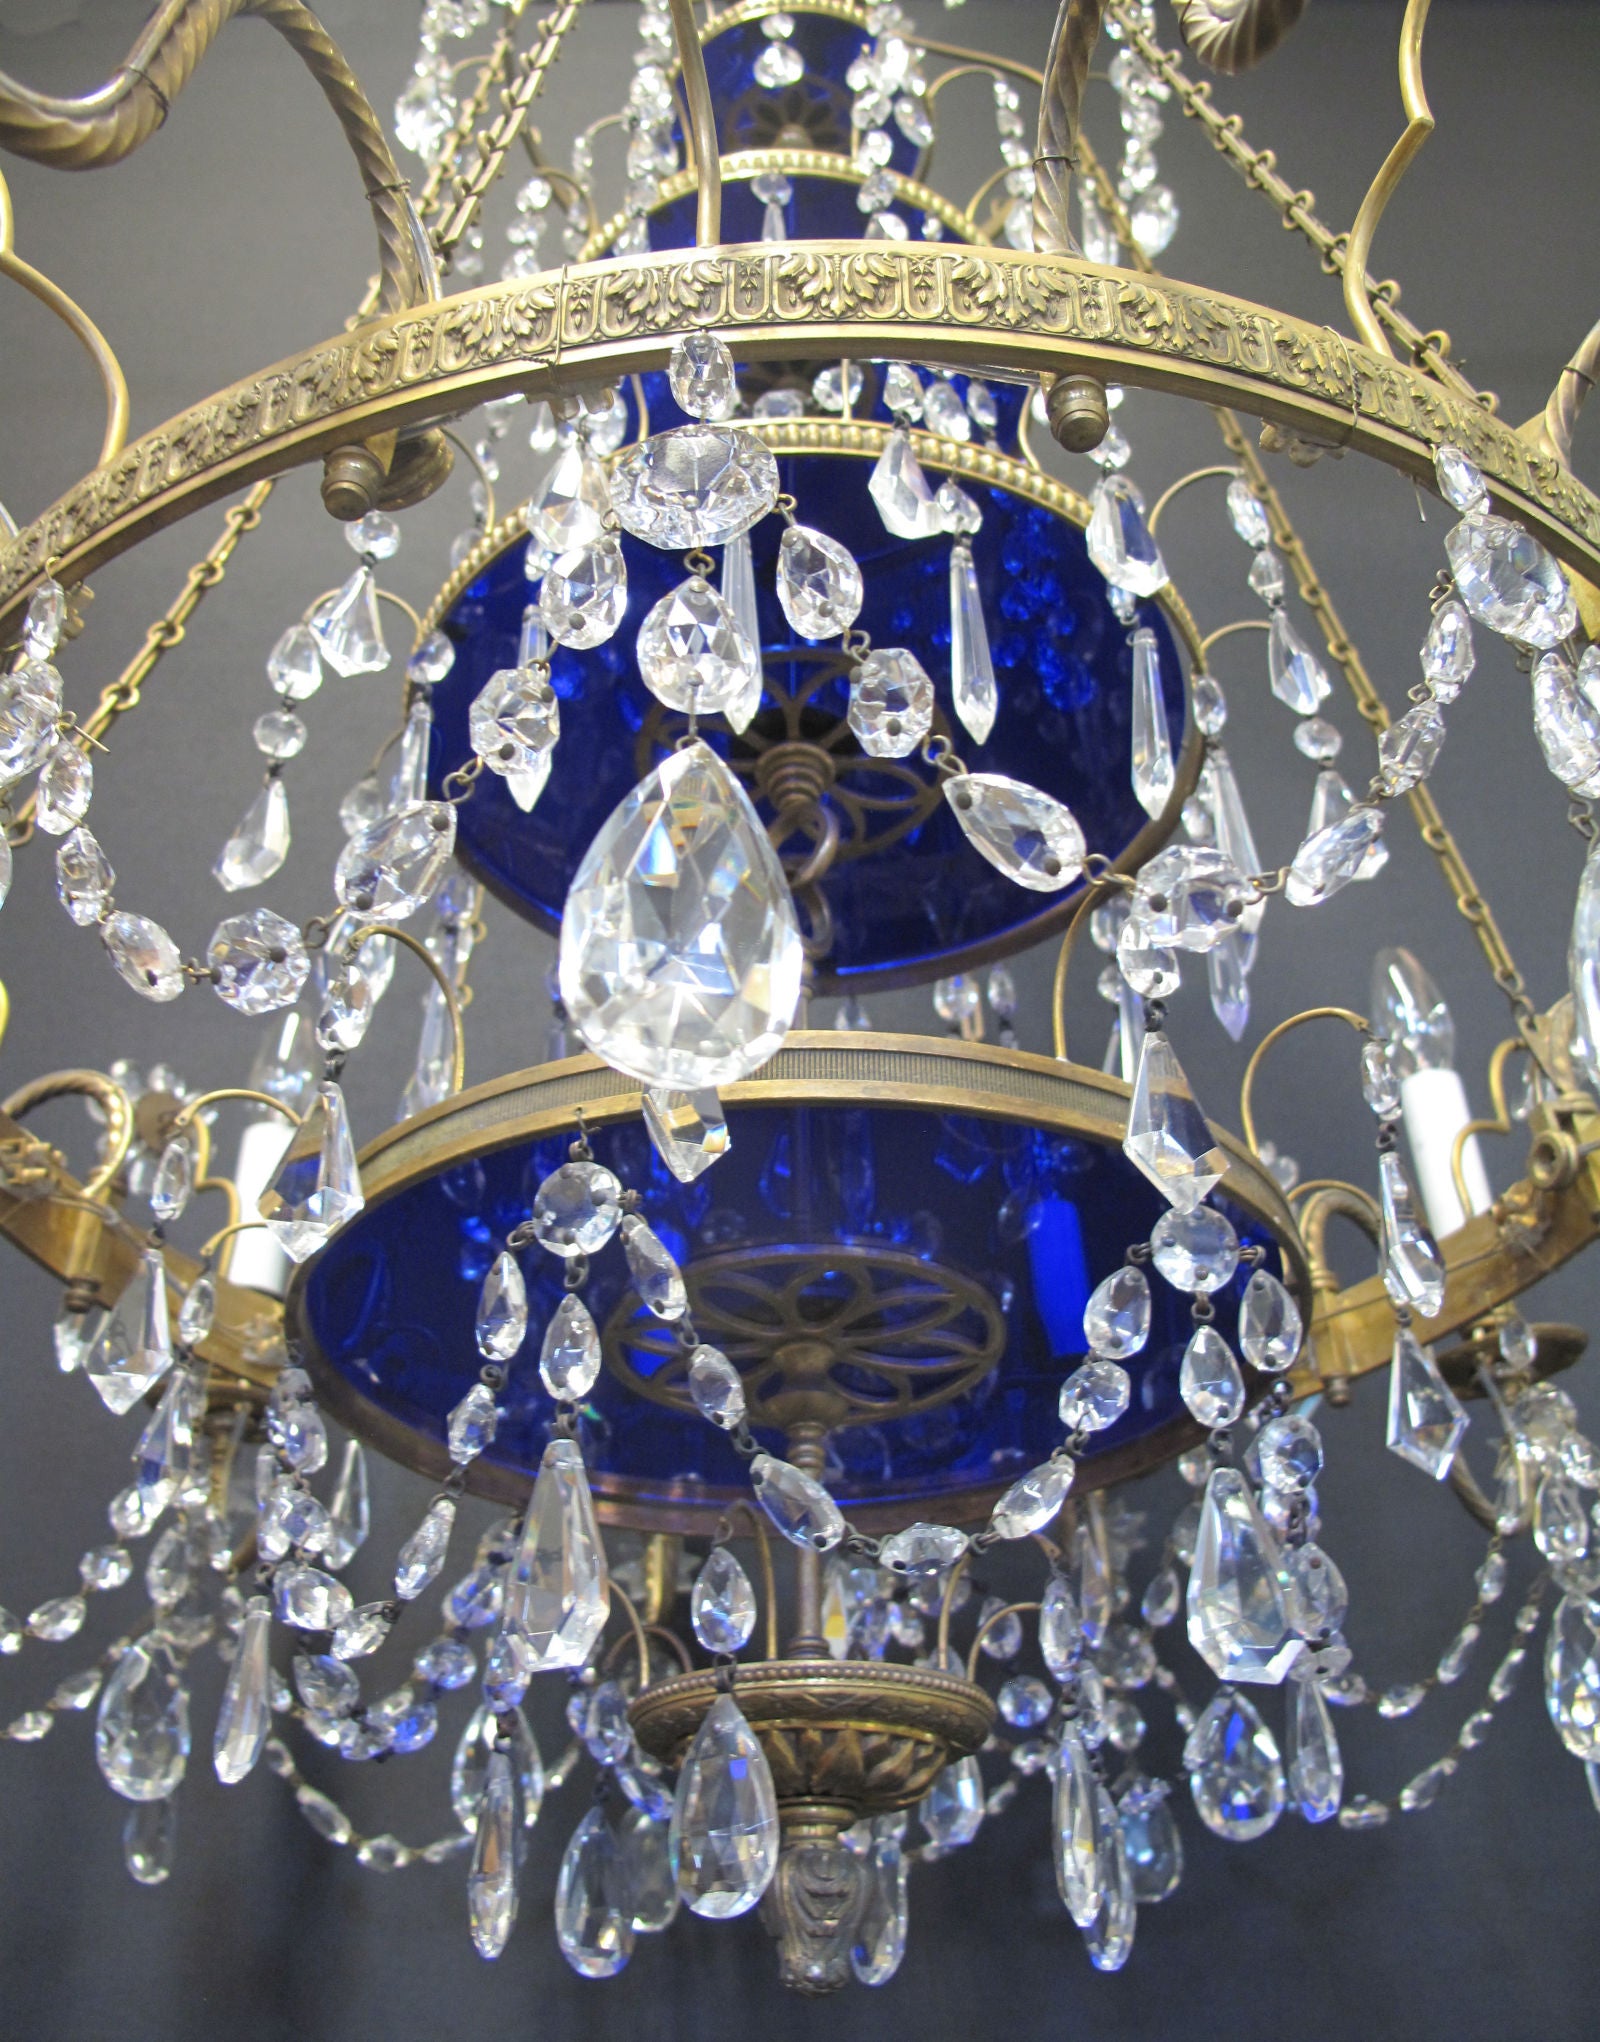 view of from underneath showing blue glass